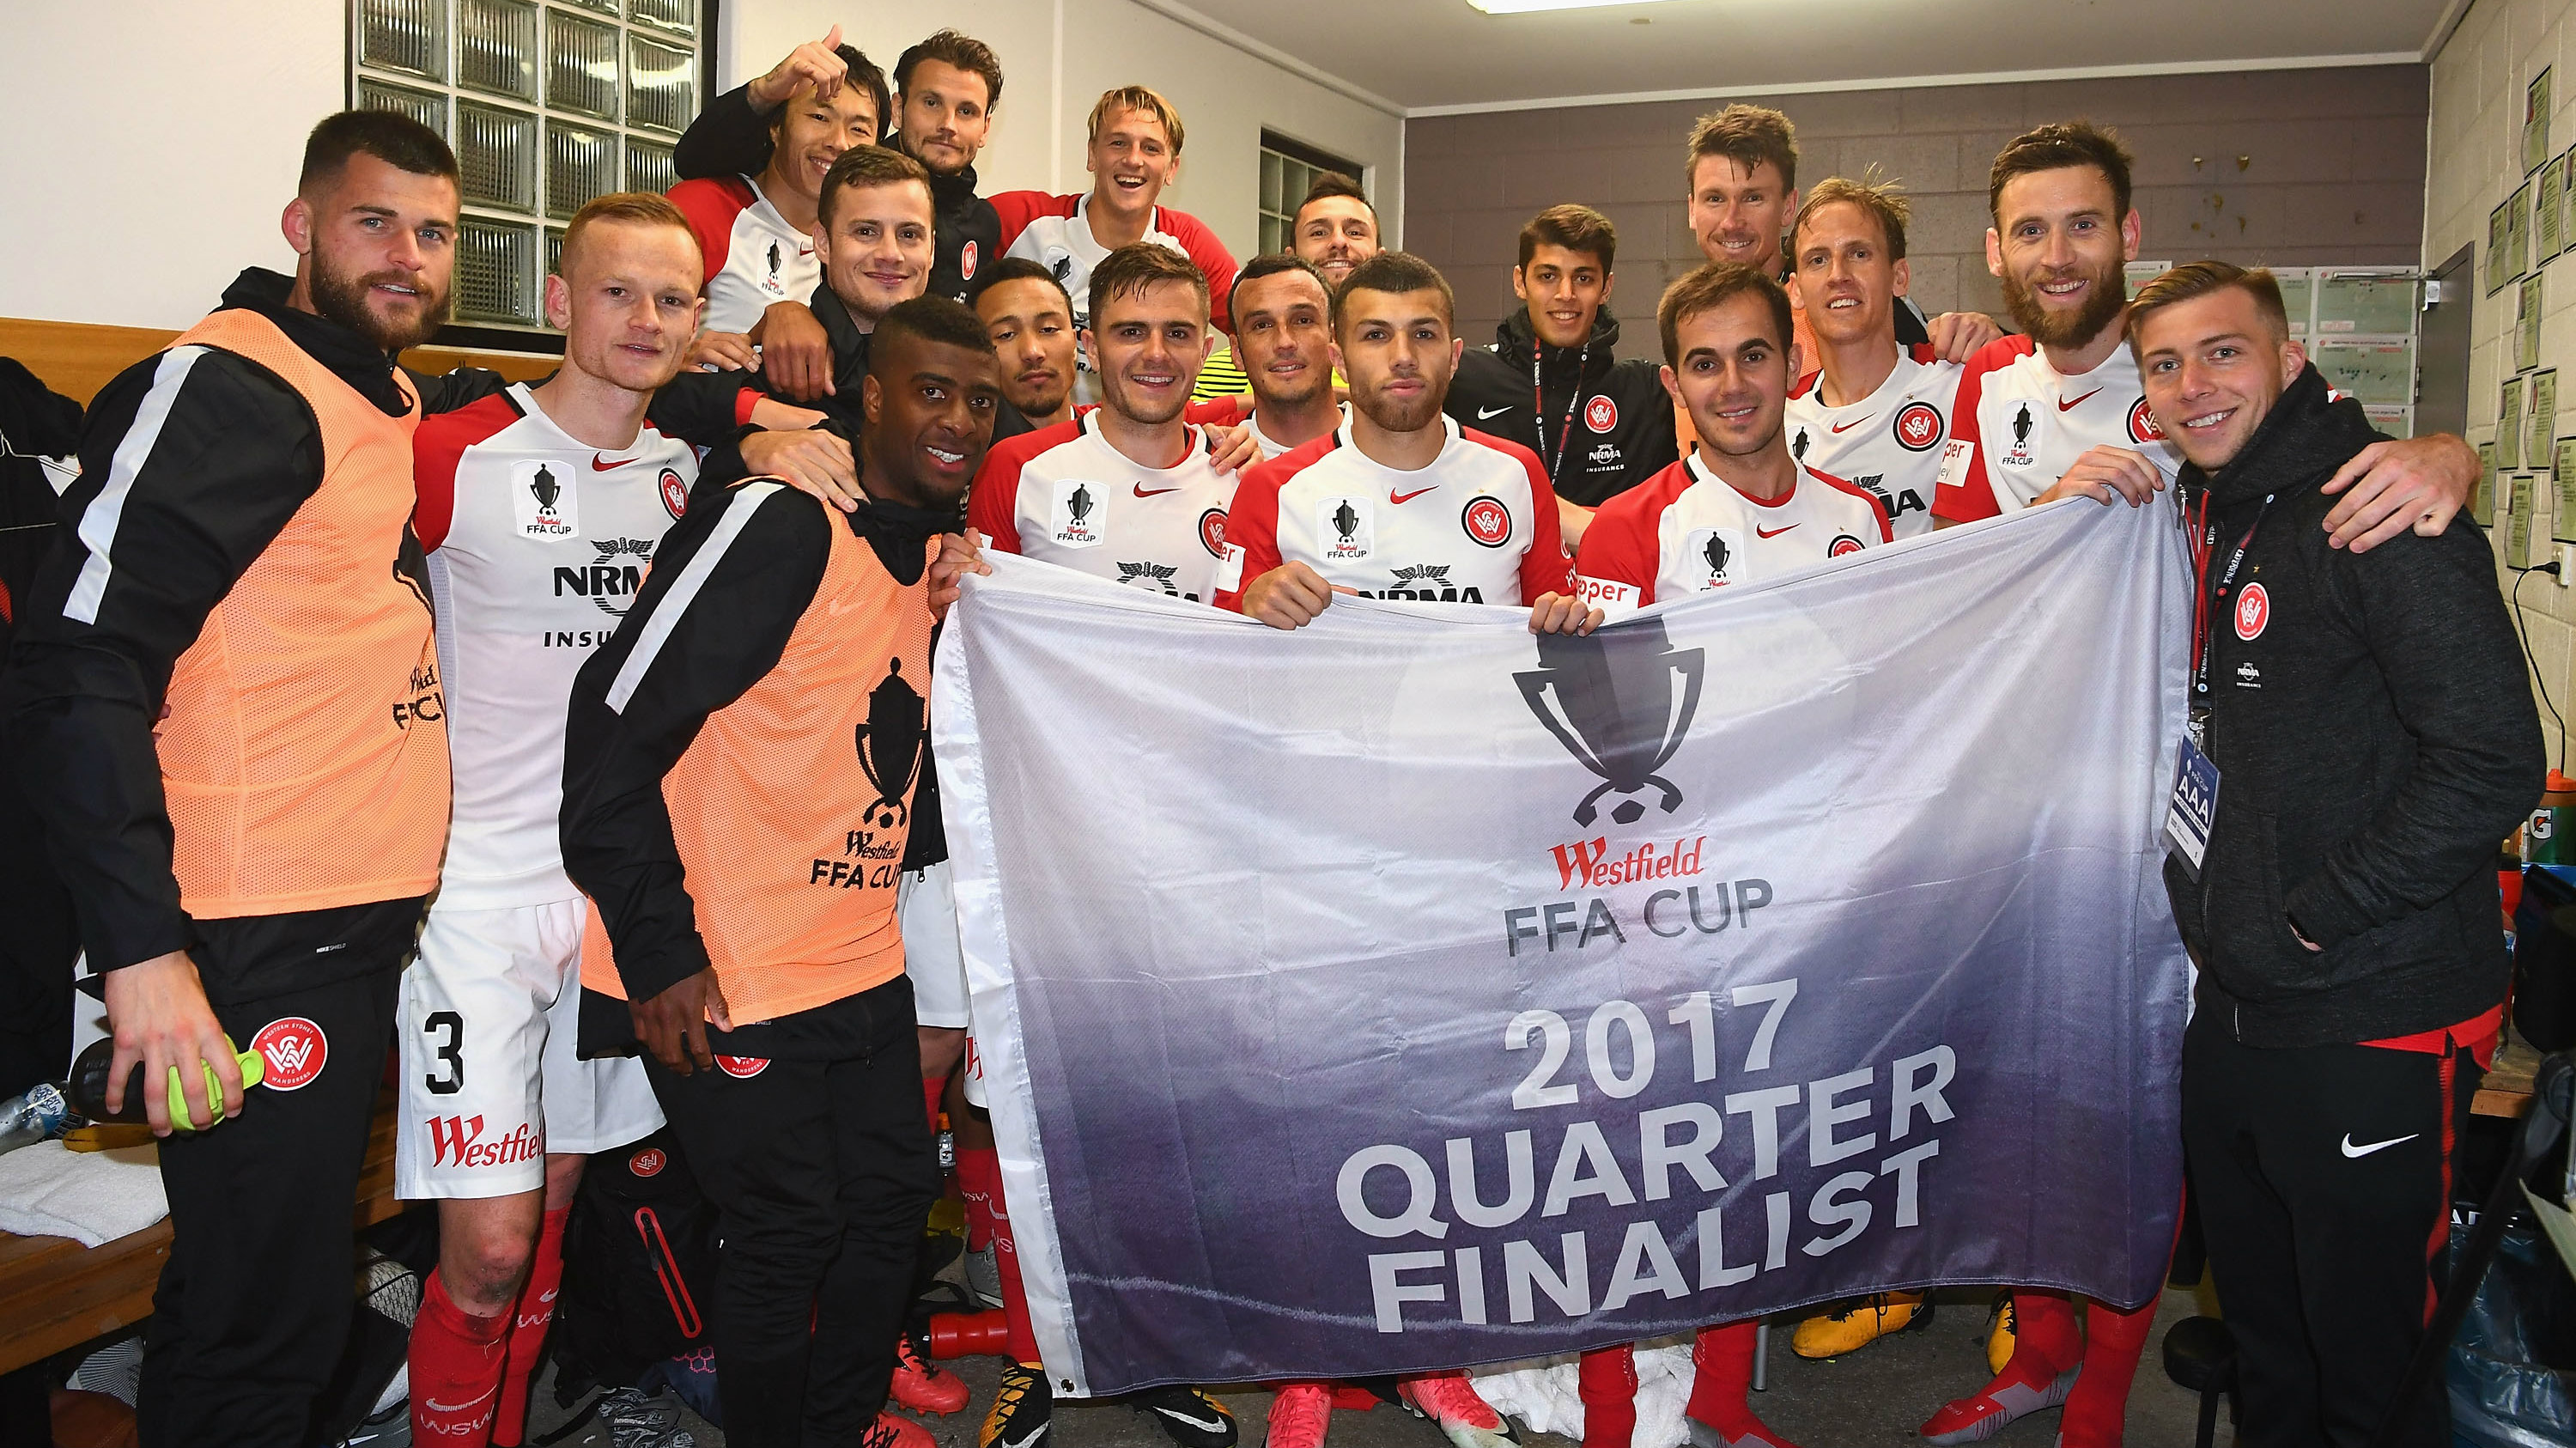 Wanderers players celebrate progressing to the FFA Cup Quarter Finals.